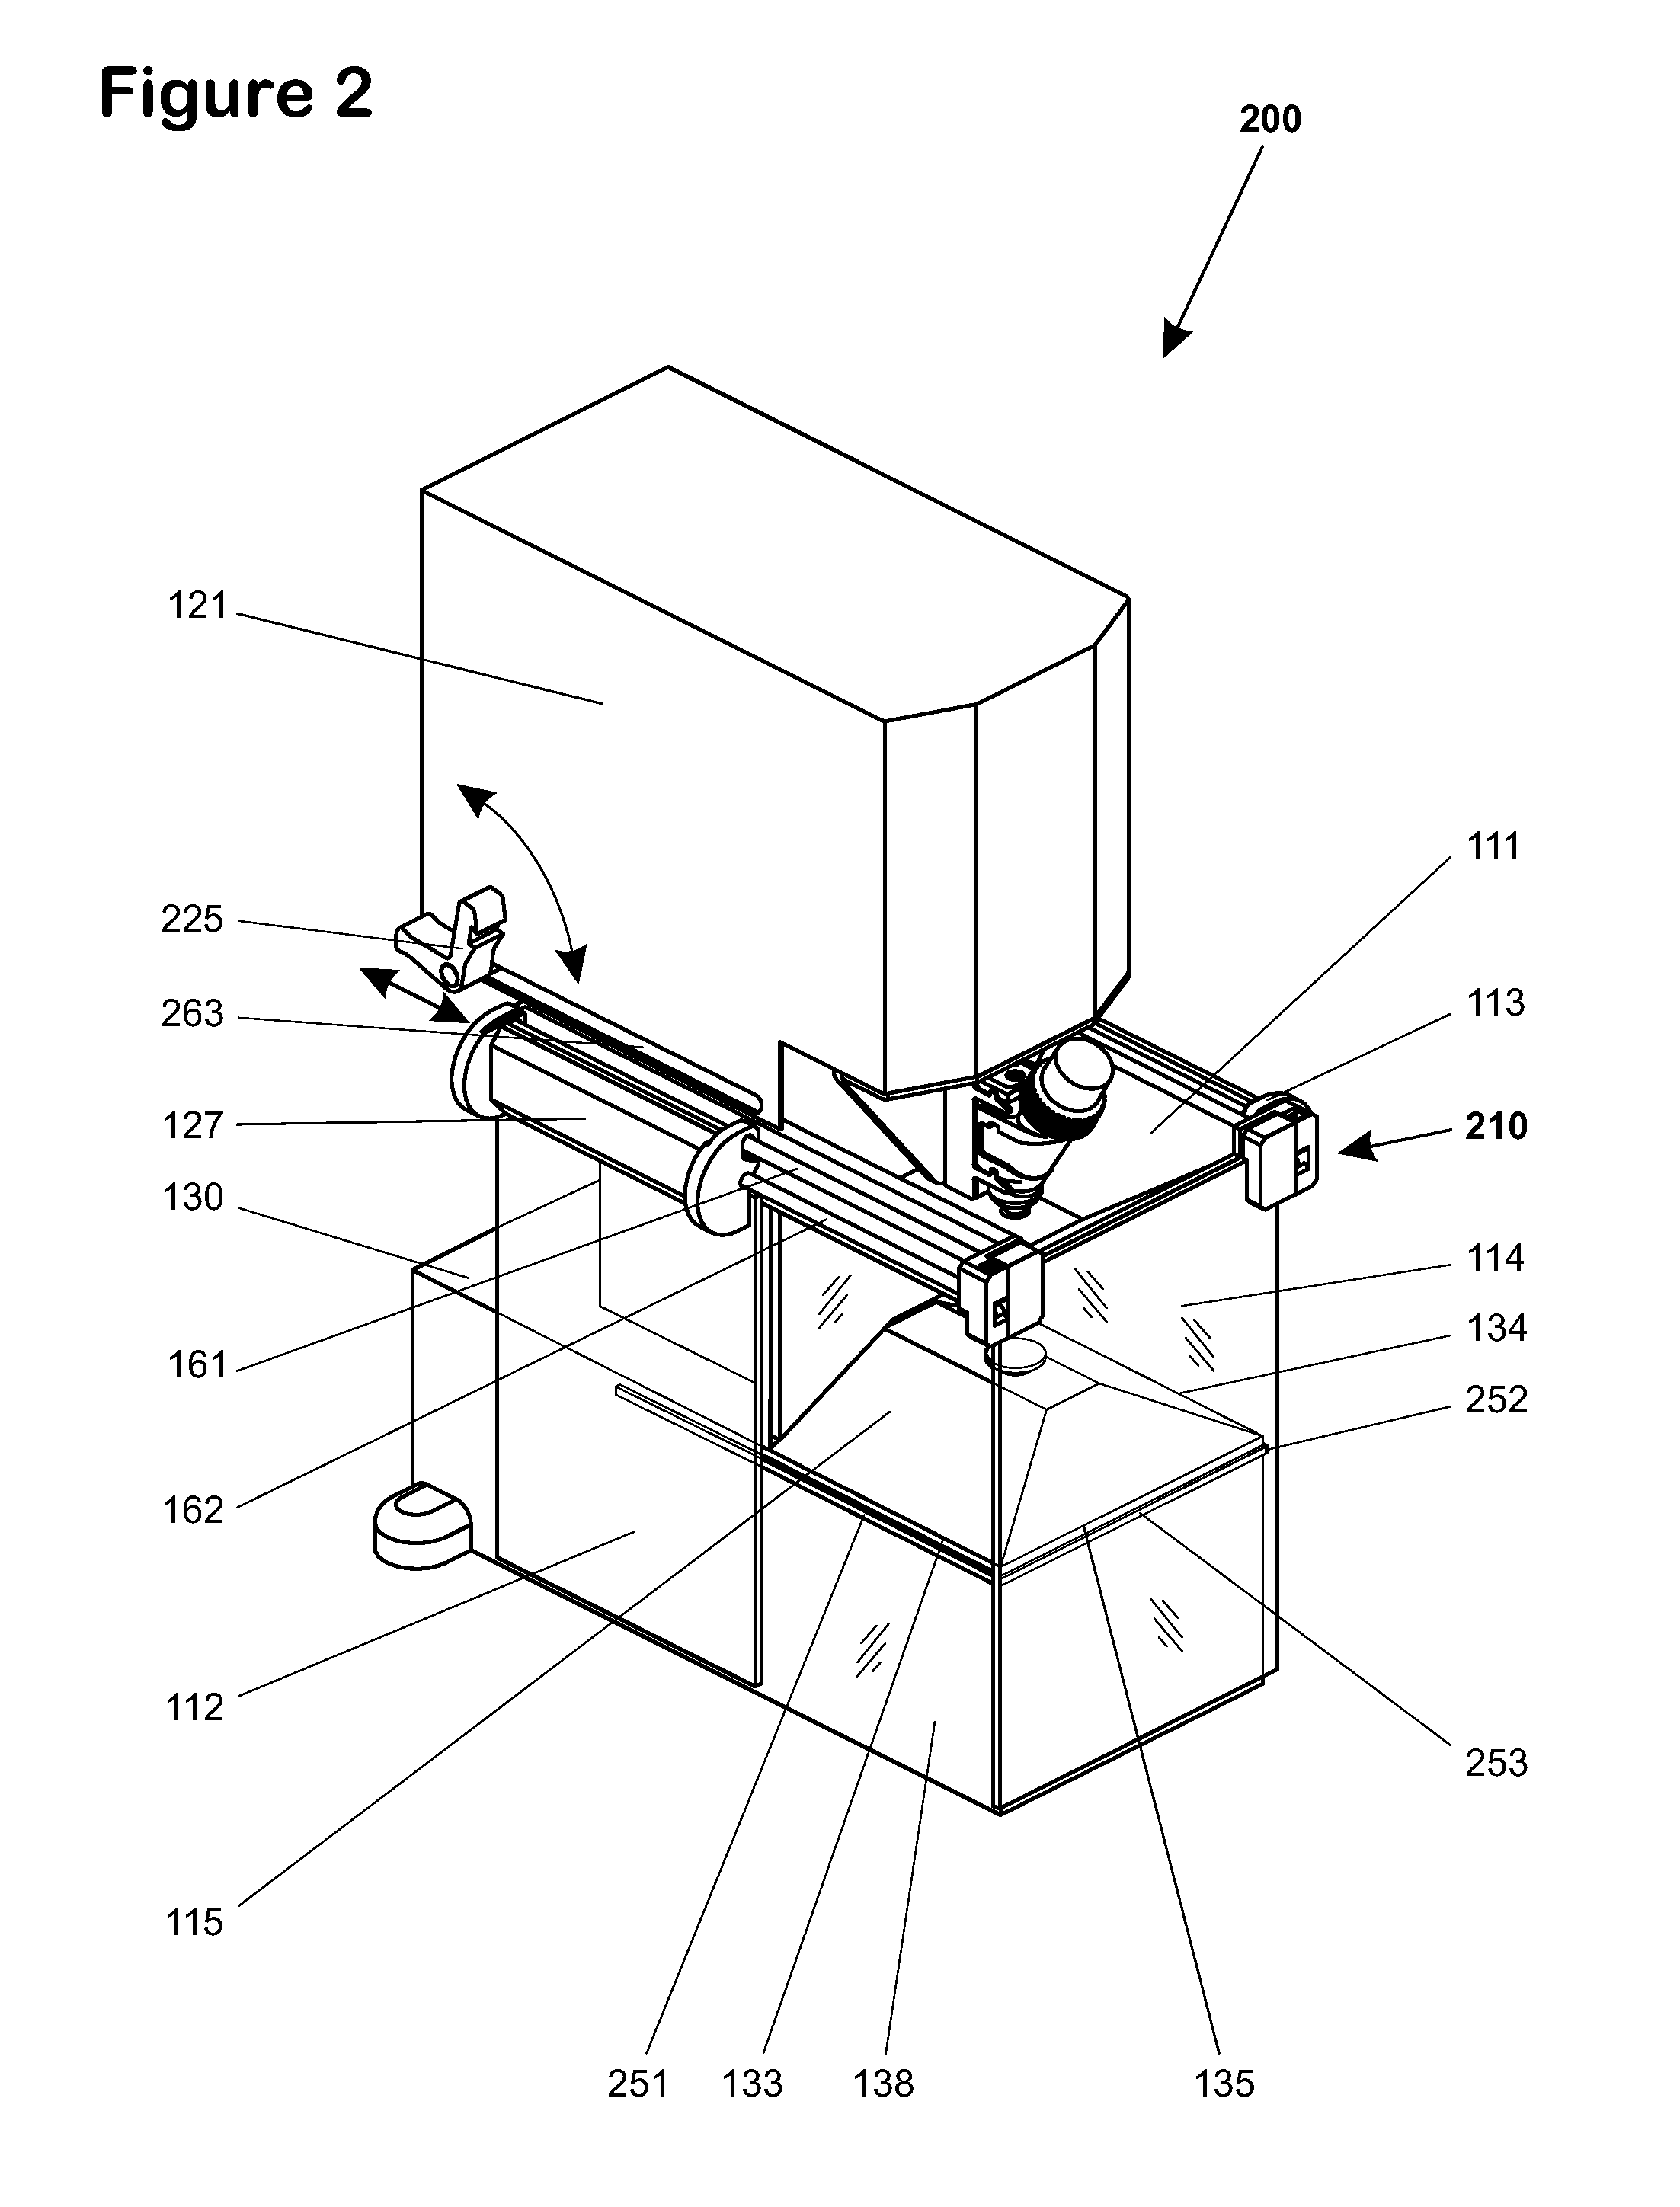 Enclosure for a laboratory balance with a sliding side wall mounted such that the top guide sliding mechanism imparts a turning moment on the lower edge of the wall to press it against an abutment of the weighing compartment to form a seal